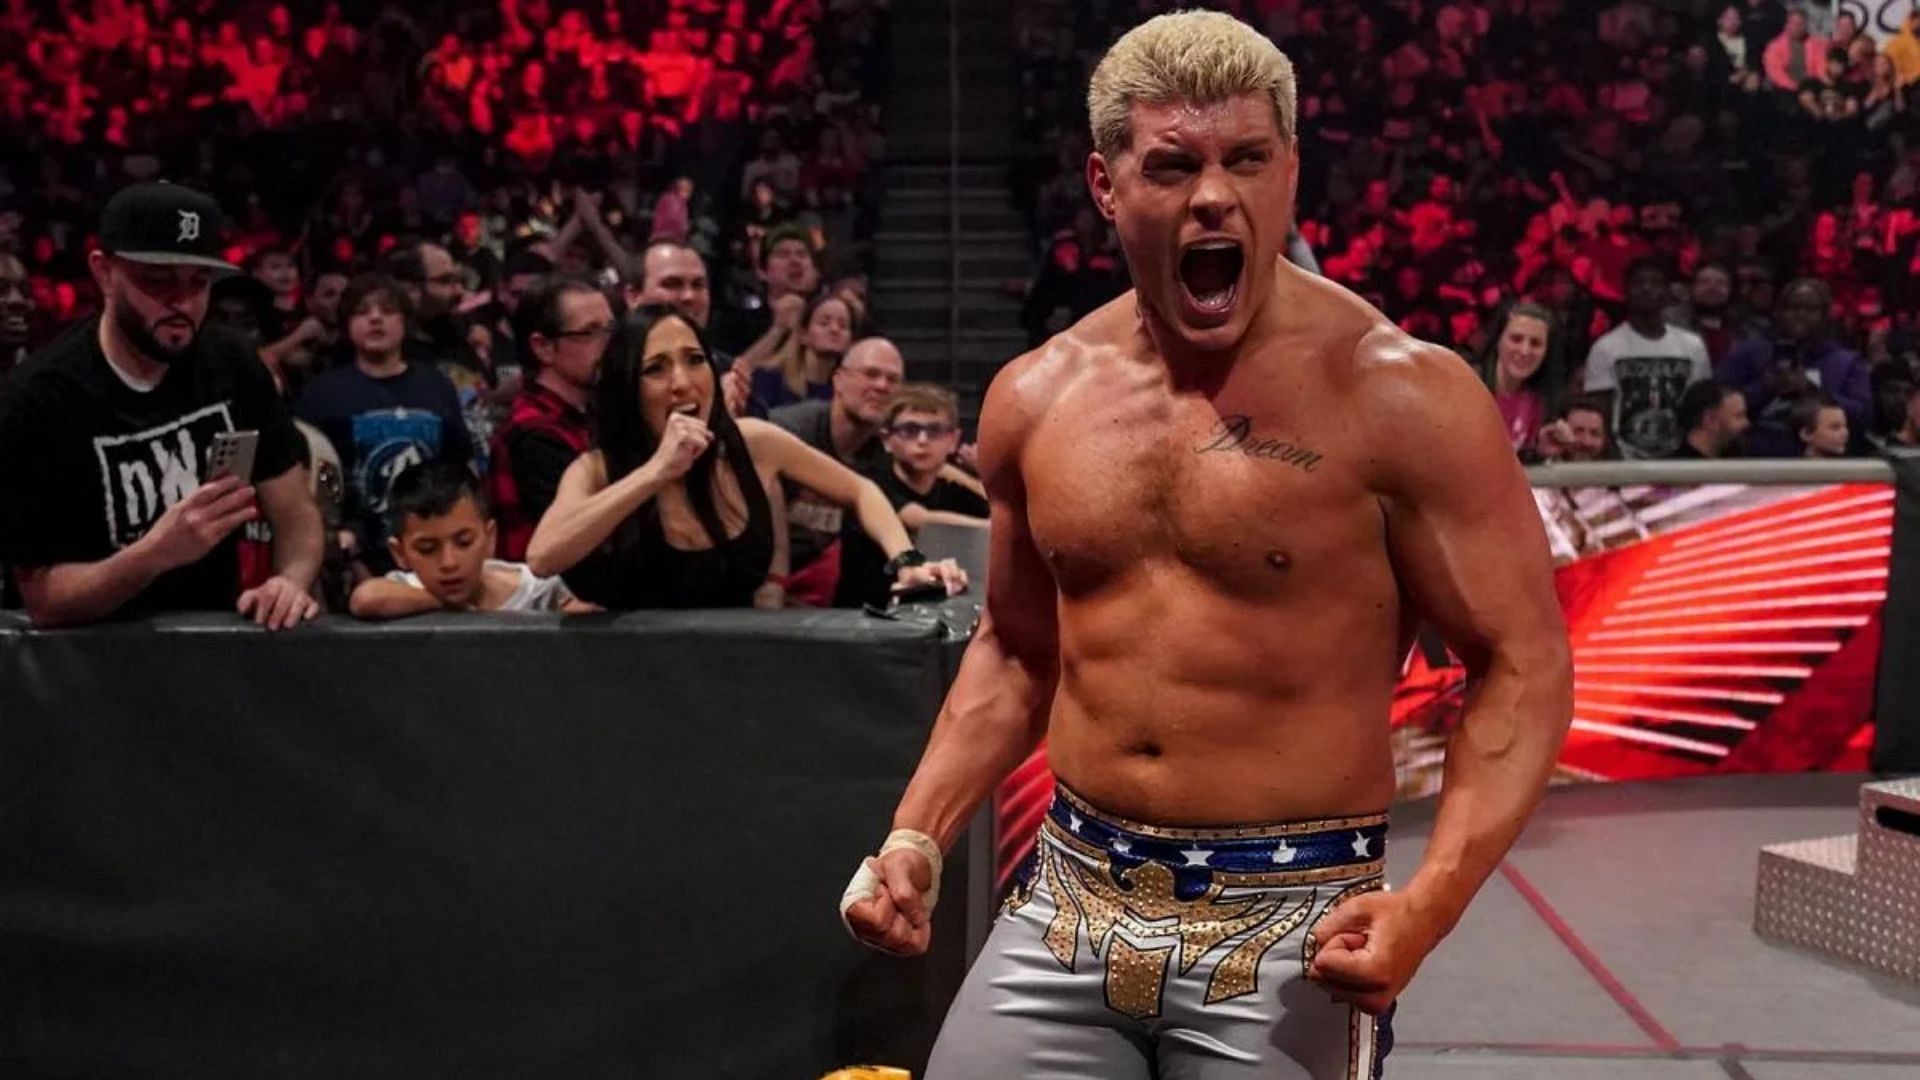 Cody Rhodes is one of the top stars on WWE RAW